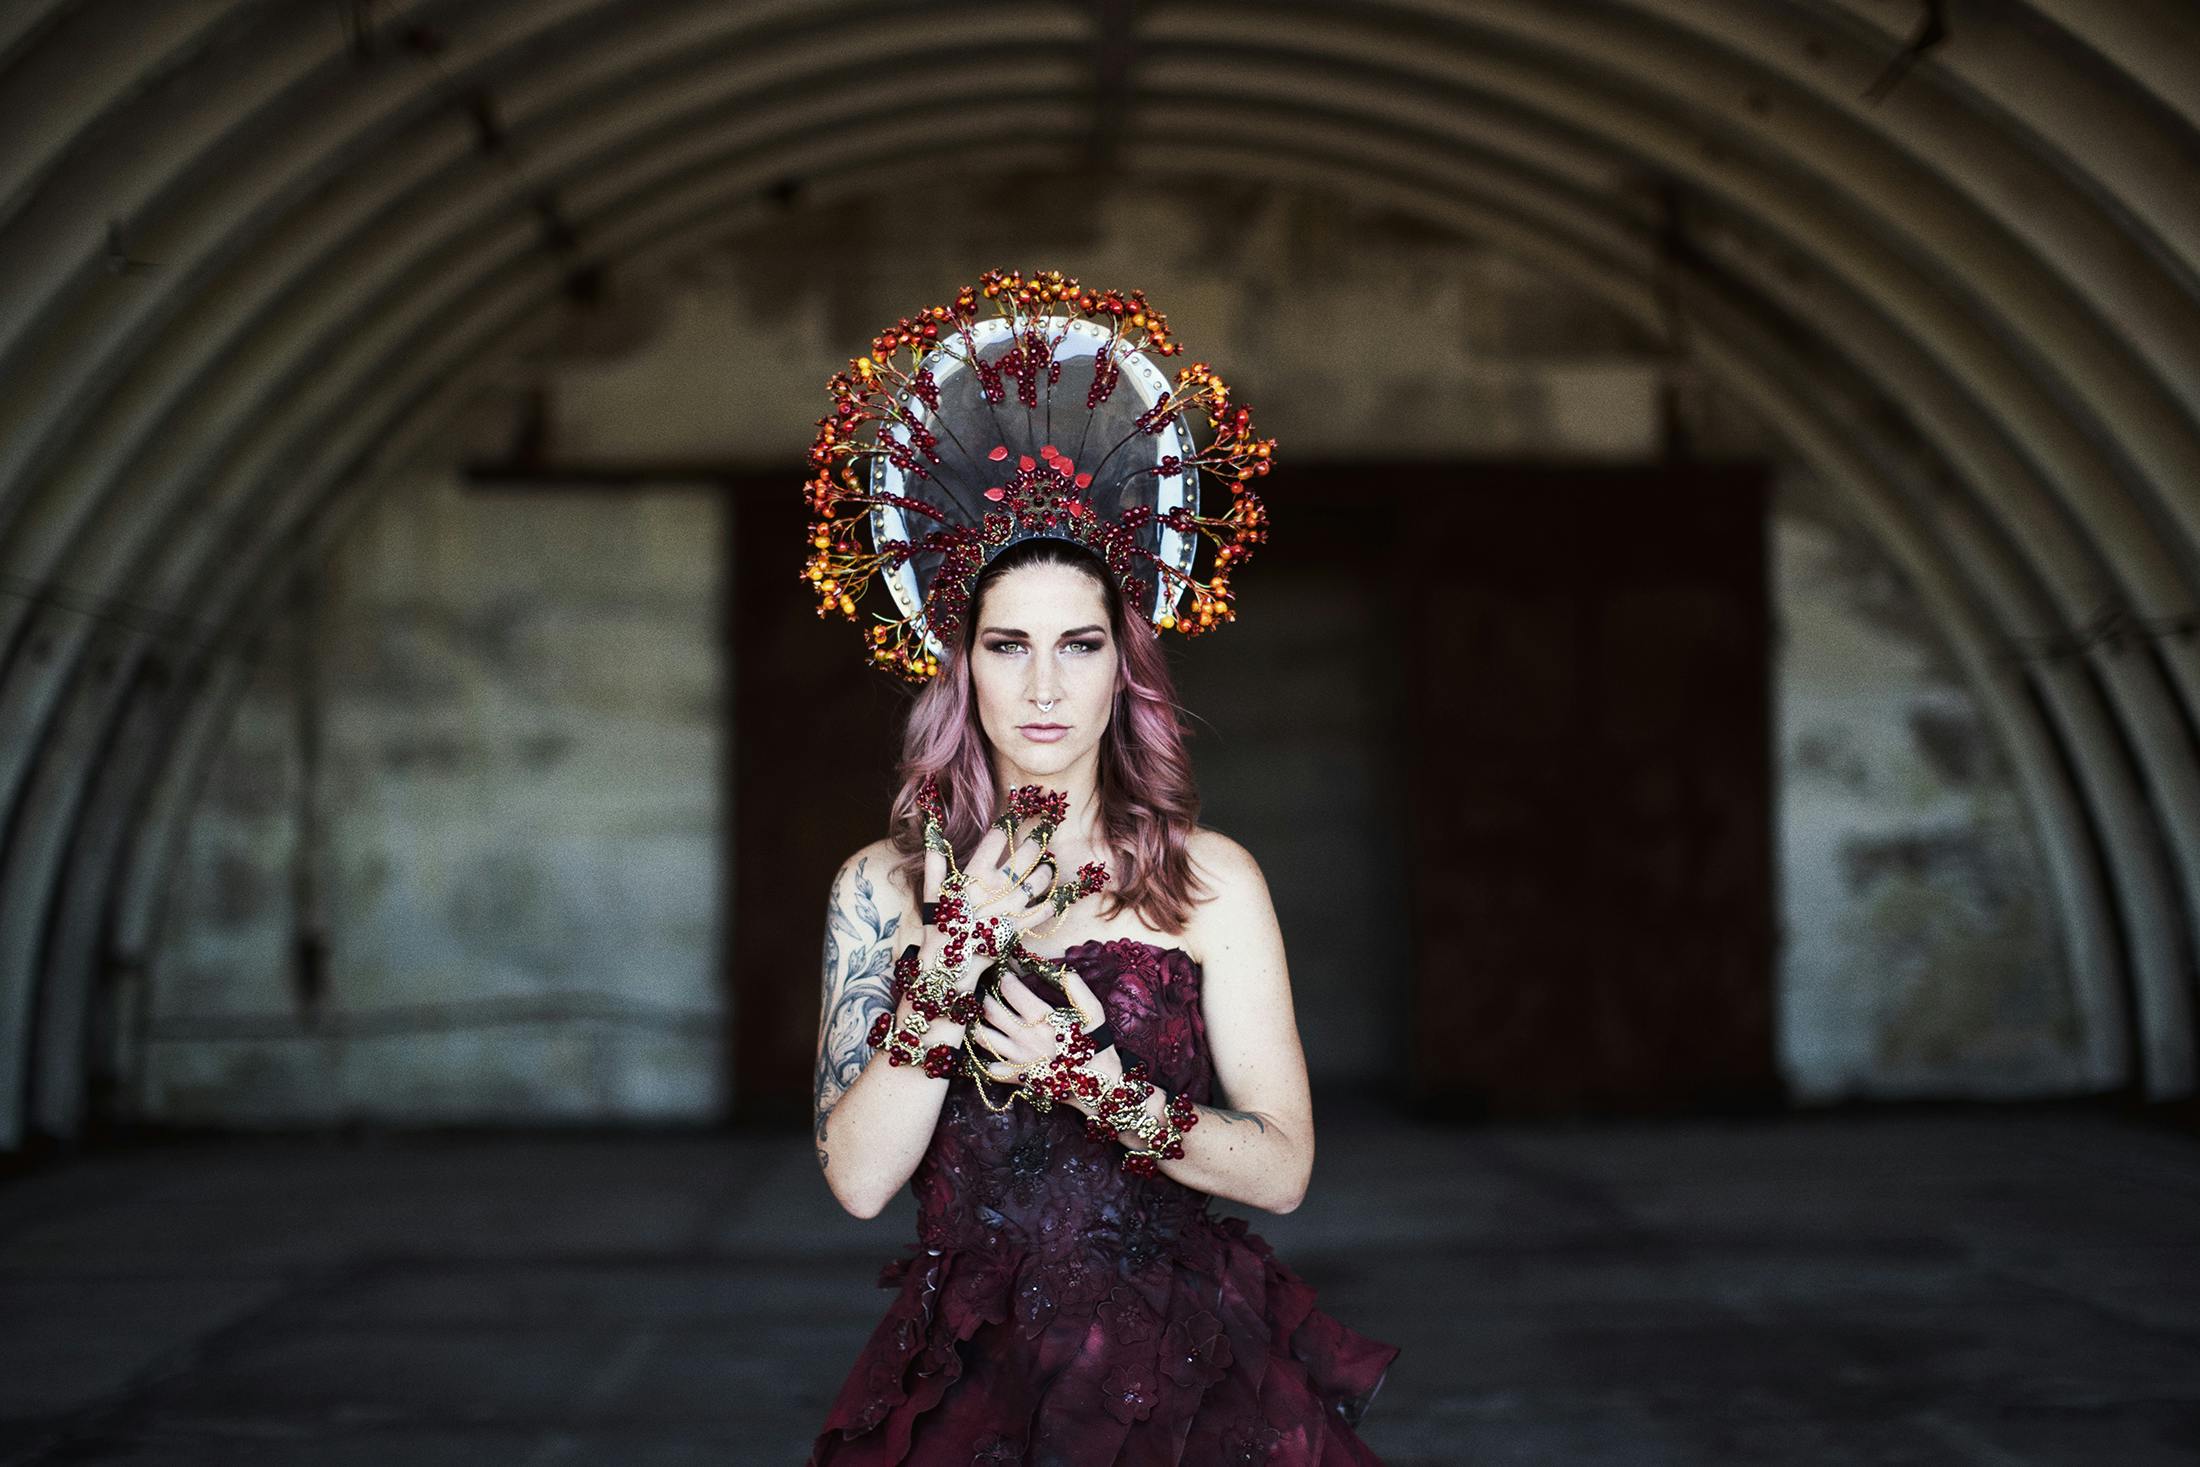 Charlotte Wessels: "When was the last time you heard someone ask, 'What's it like being a man in a metal band?'"